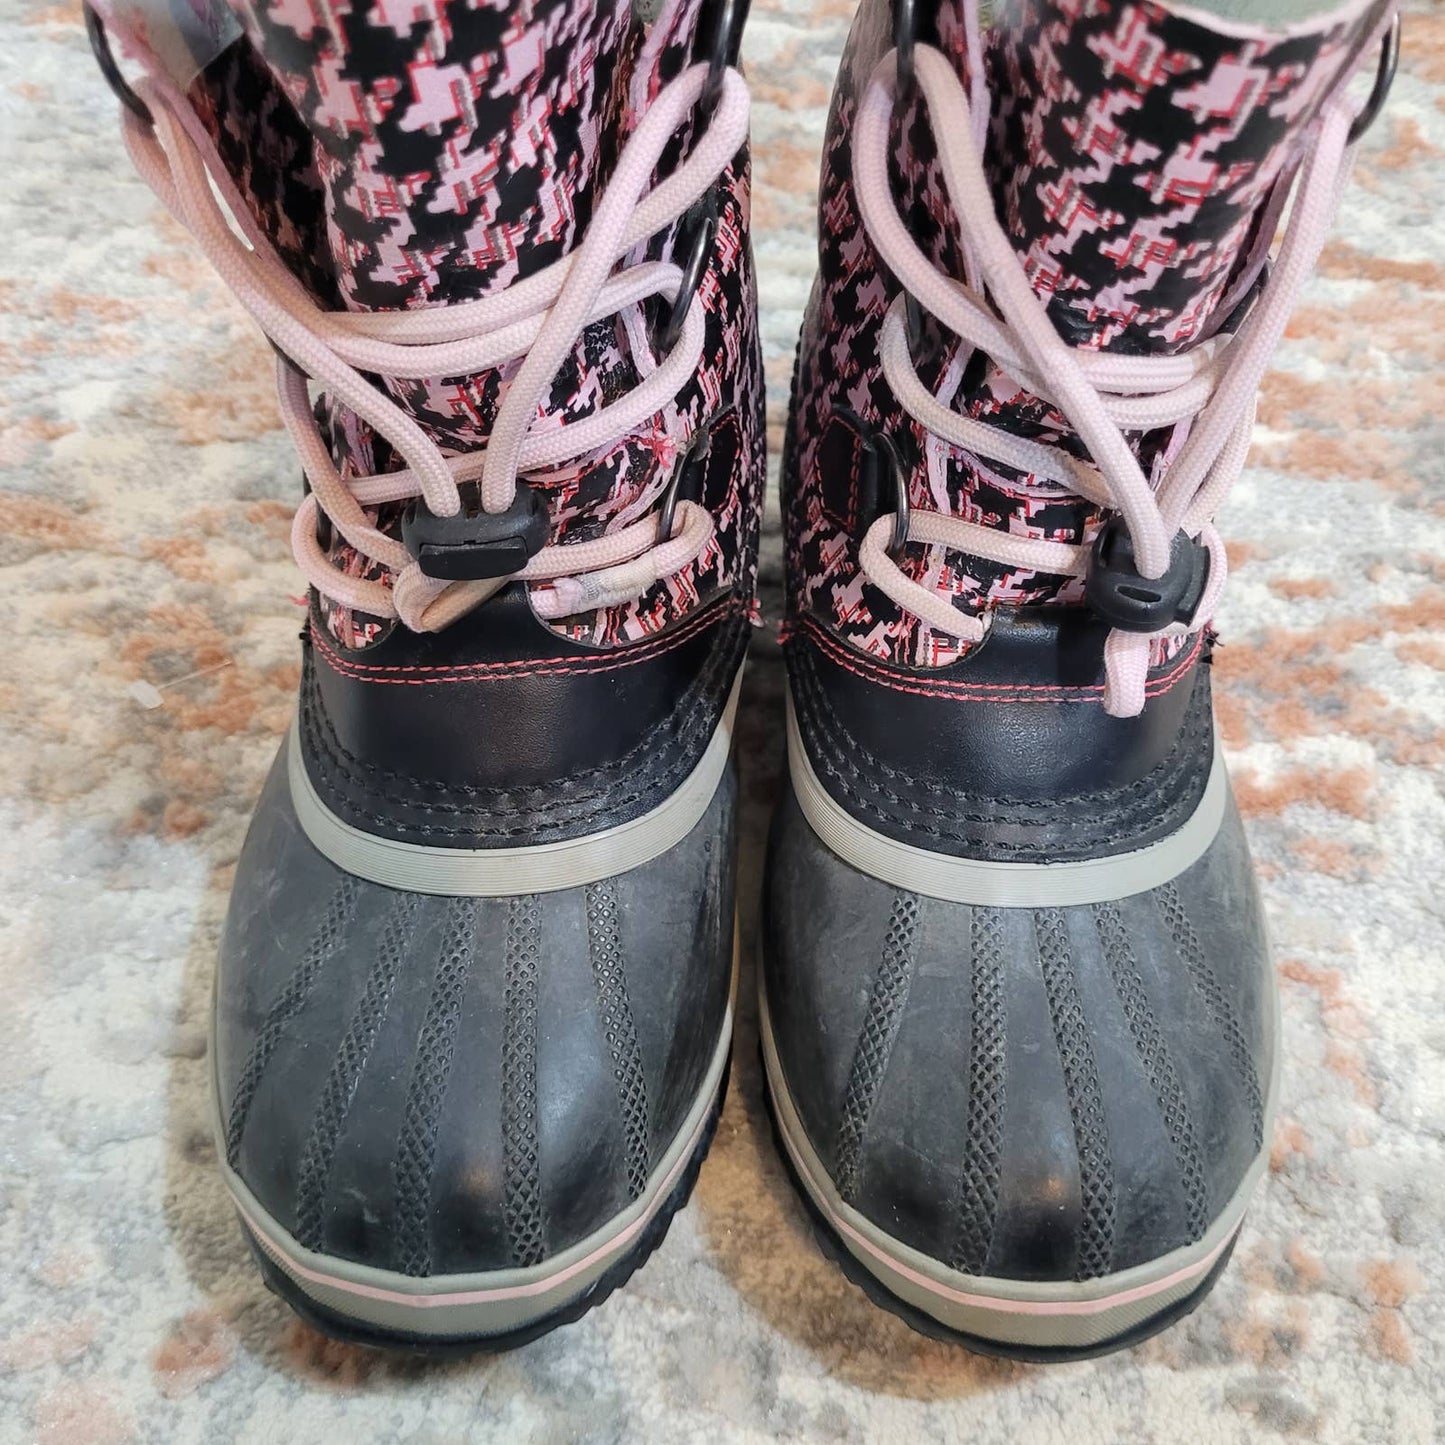 Sorel Boots NY1443-637 Waterproof Pink Black Houndstooth Boots AS IS - Size 5Markita's ClosetSorel